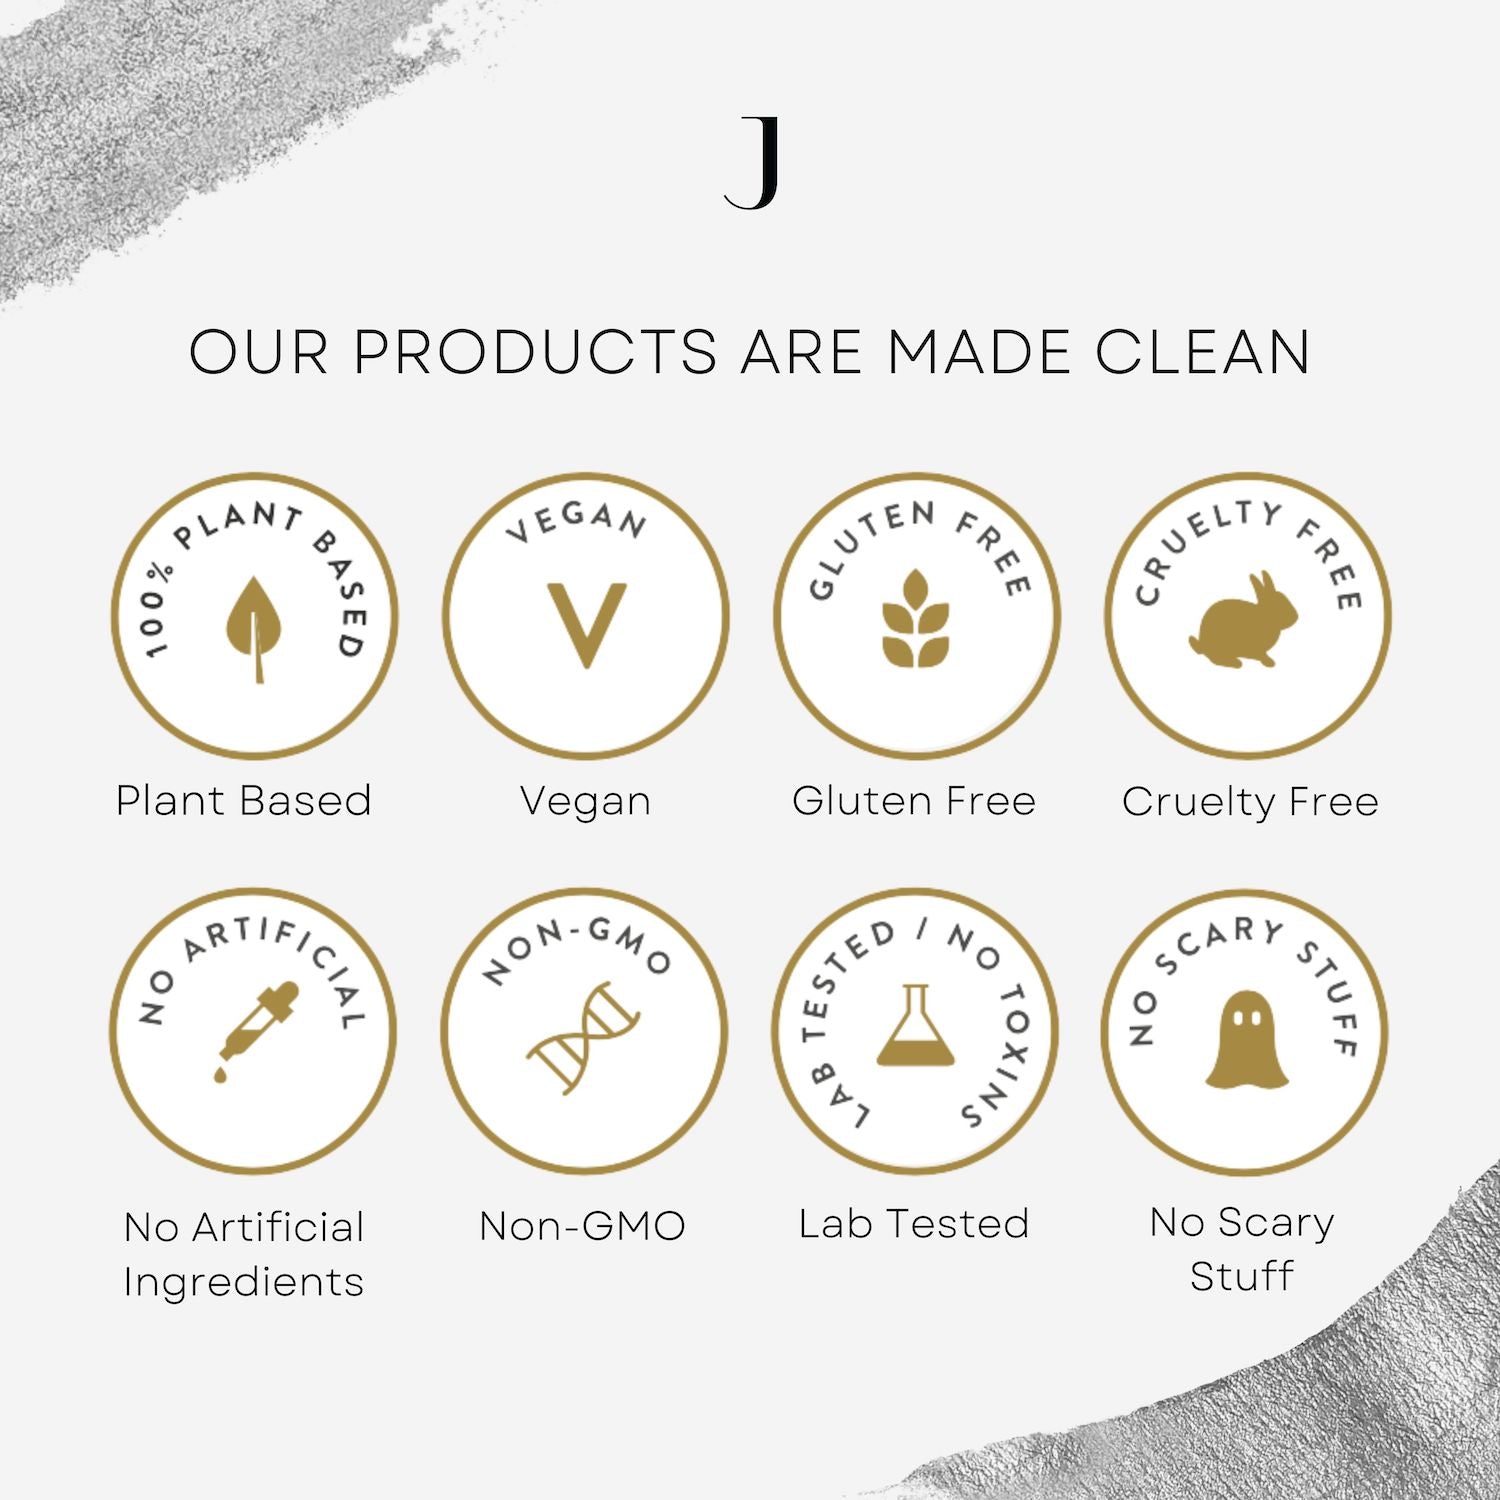 Our Products are made clean - Vegan, Gluten Free, Cruelty Free, and more.